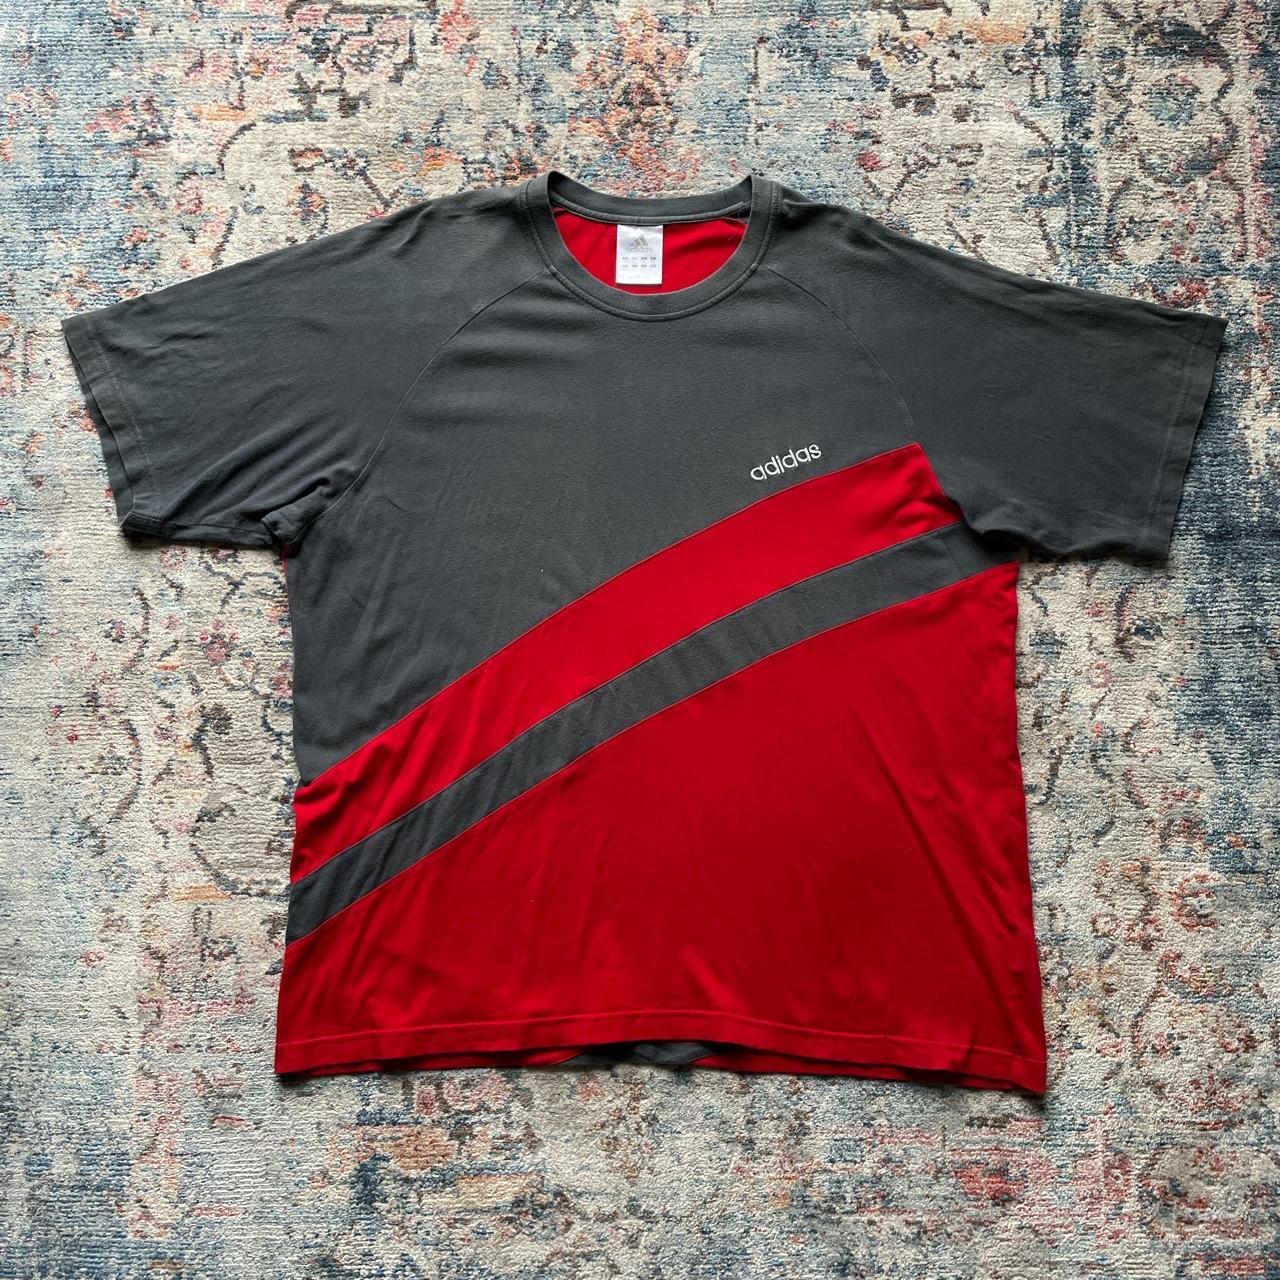 Vintage Adidas Grey and Red T-Shirt